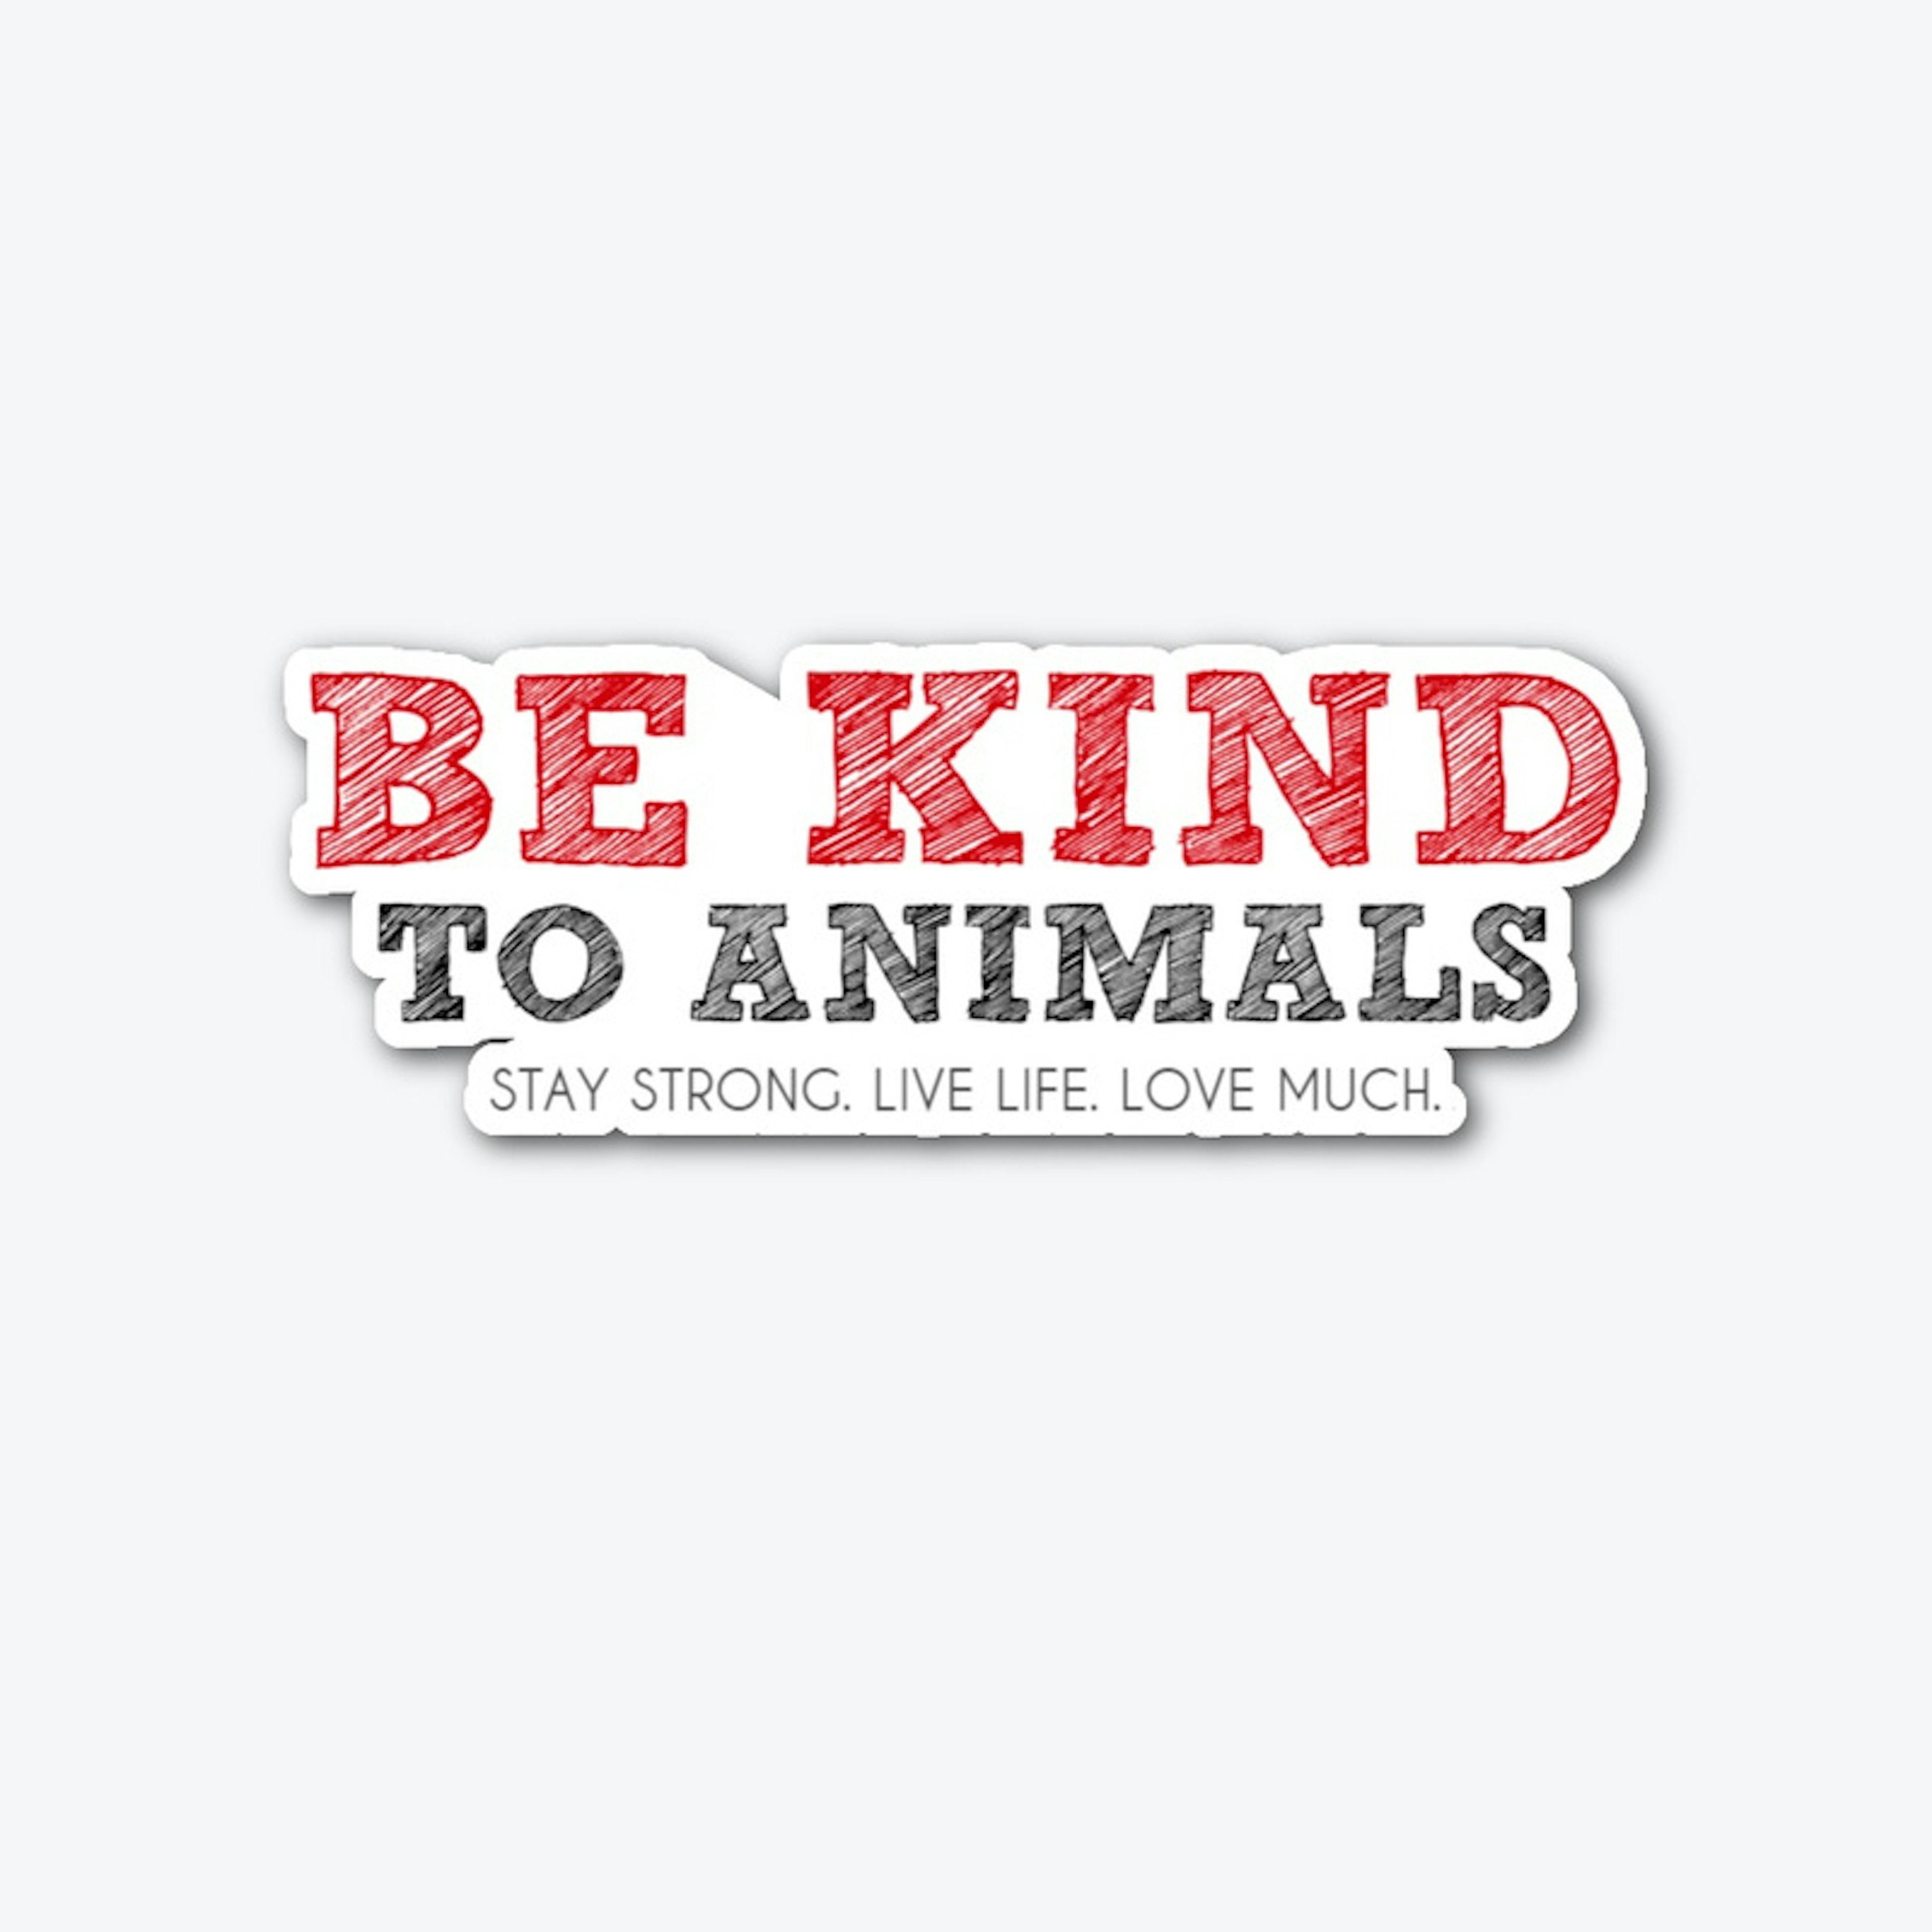 Be Kind To Animals!